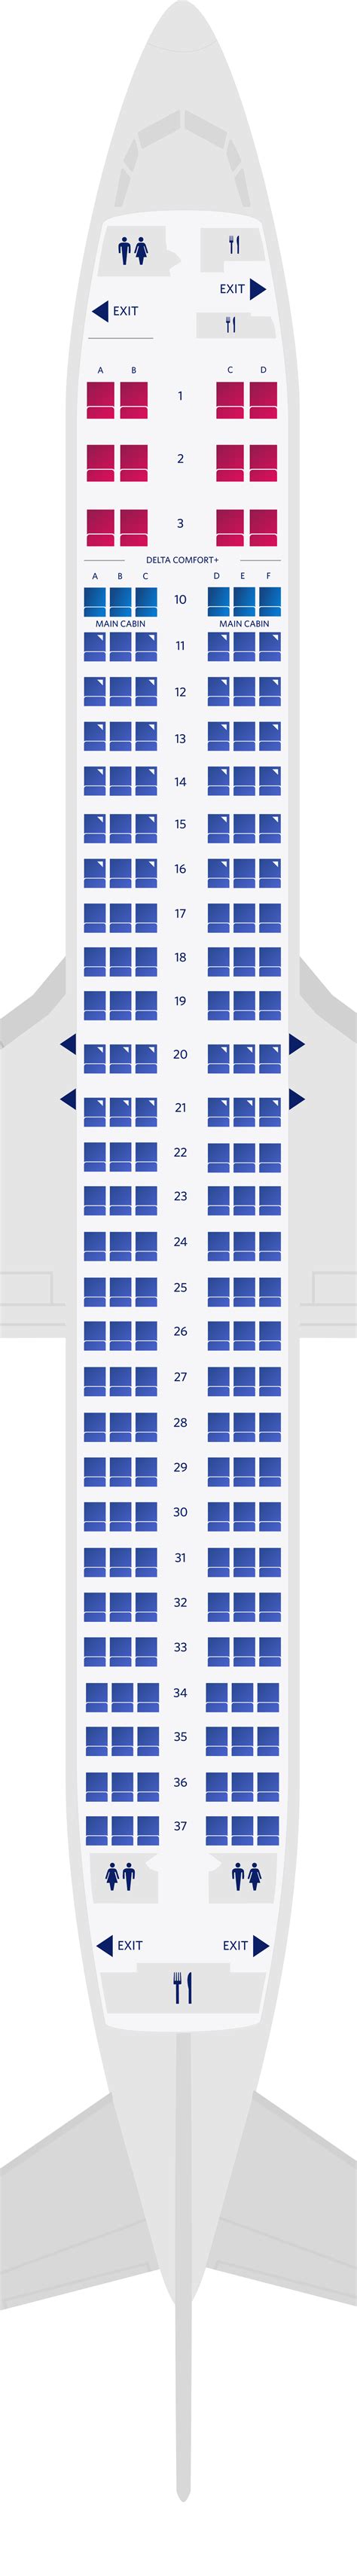  Submitted by SeatGuru User on 2017/06/11 for Seat 1J. By far the most comfortable biz class that aeromeixco has to offer, although they only have 6 of these planes, and its very possible your 787-9 will get switched out for 787-8 last minute. The seats are very soft and offer 100% privacy in the configuration with direct aisle access for everyone. . 